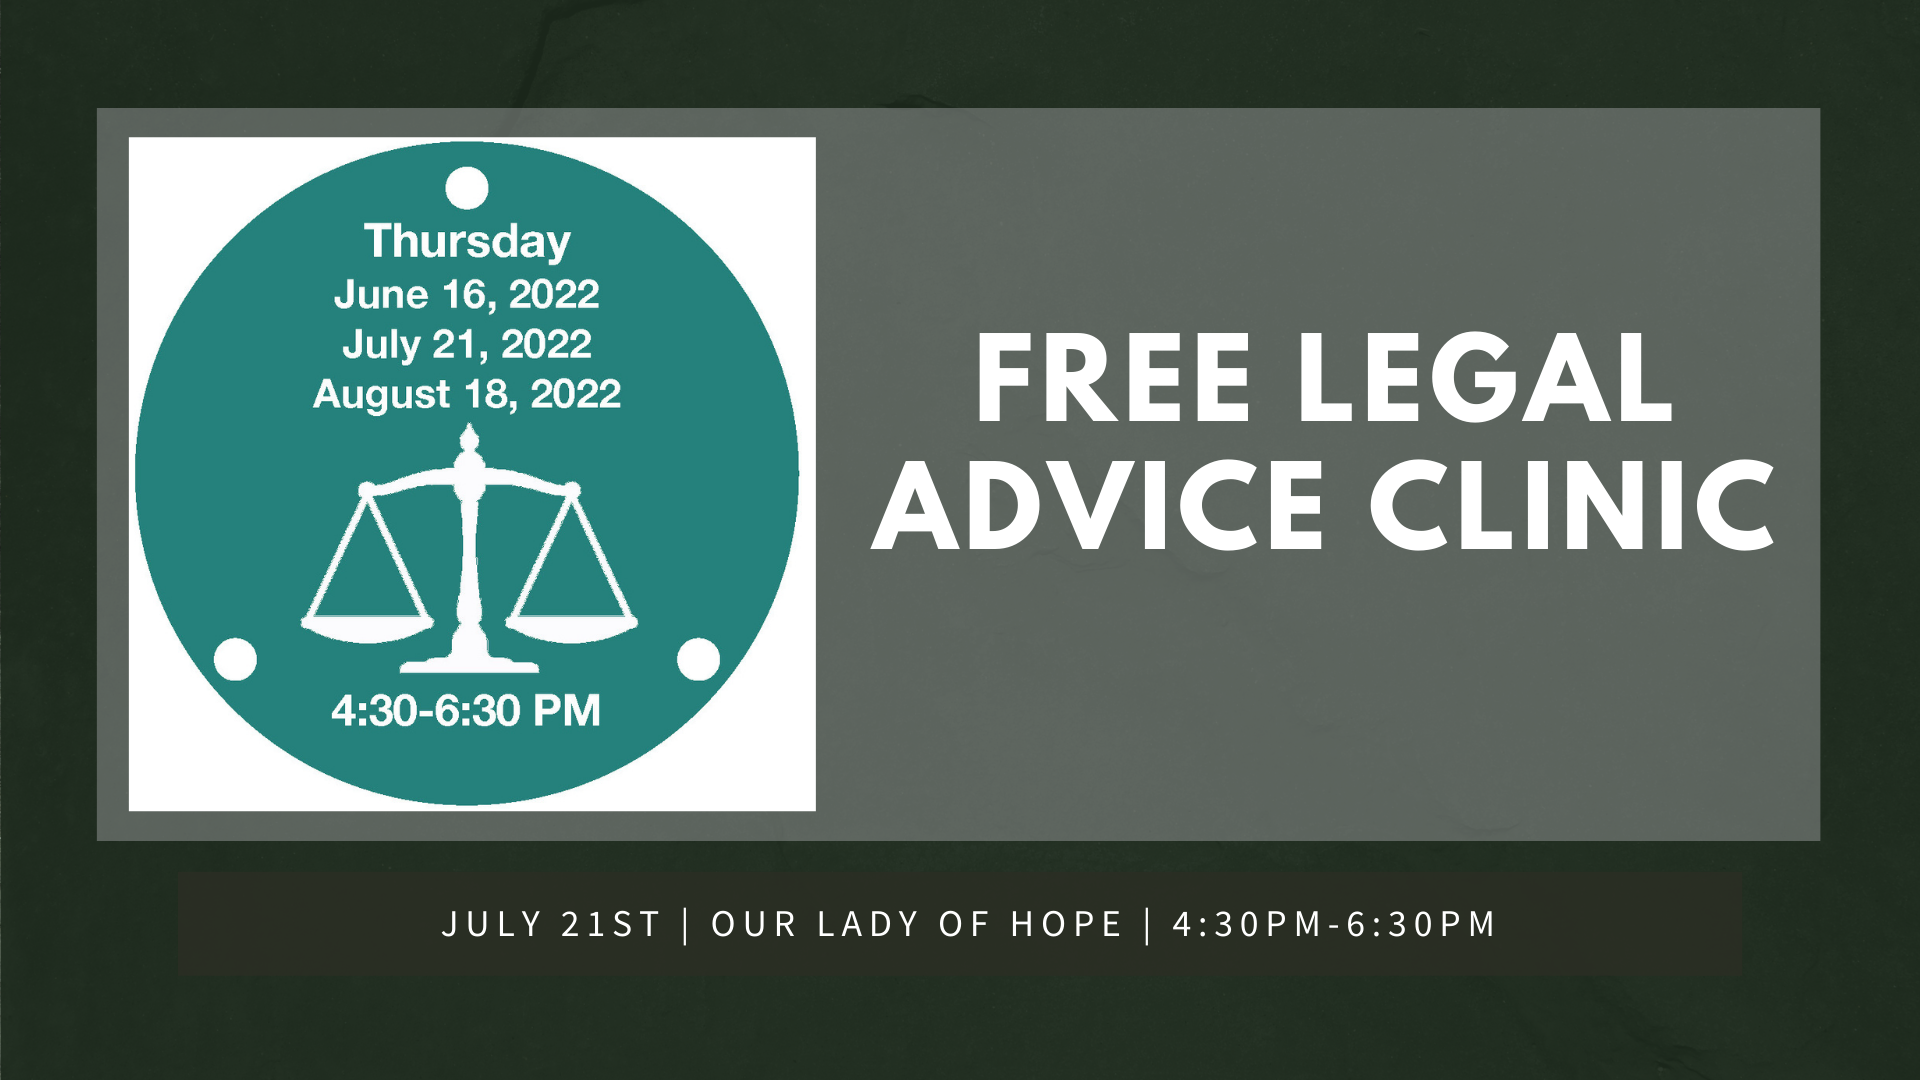 Image listing the dates for free legal advice clincs